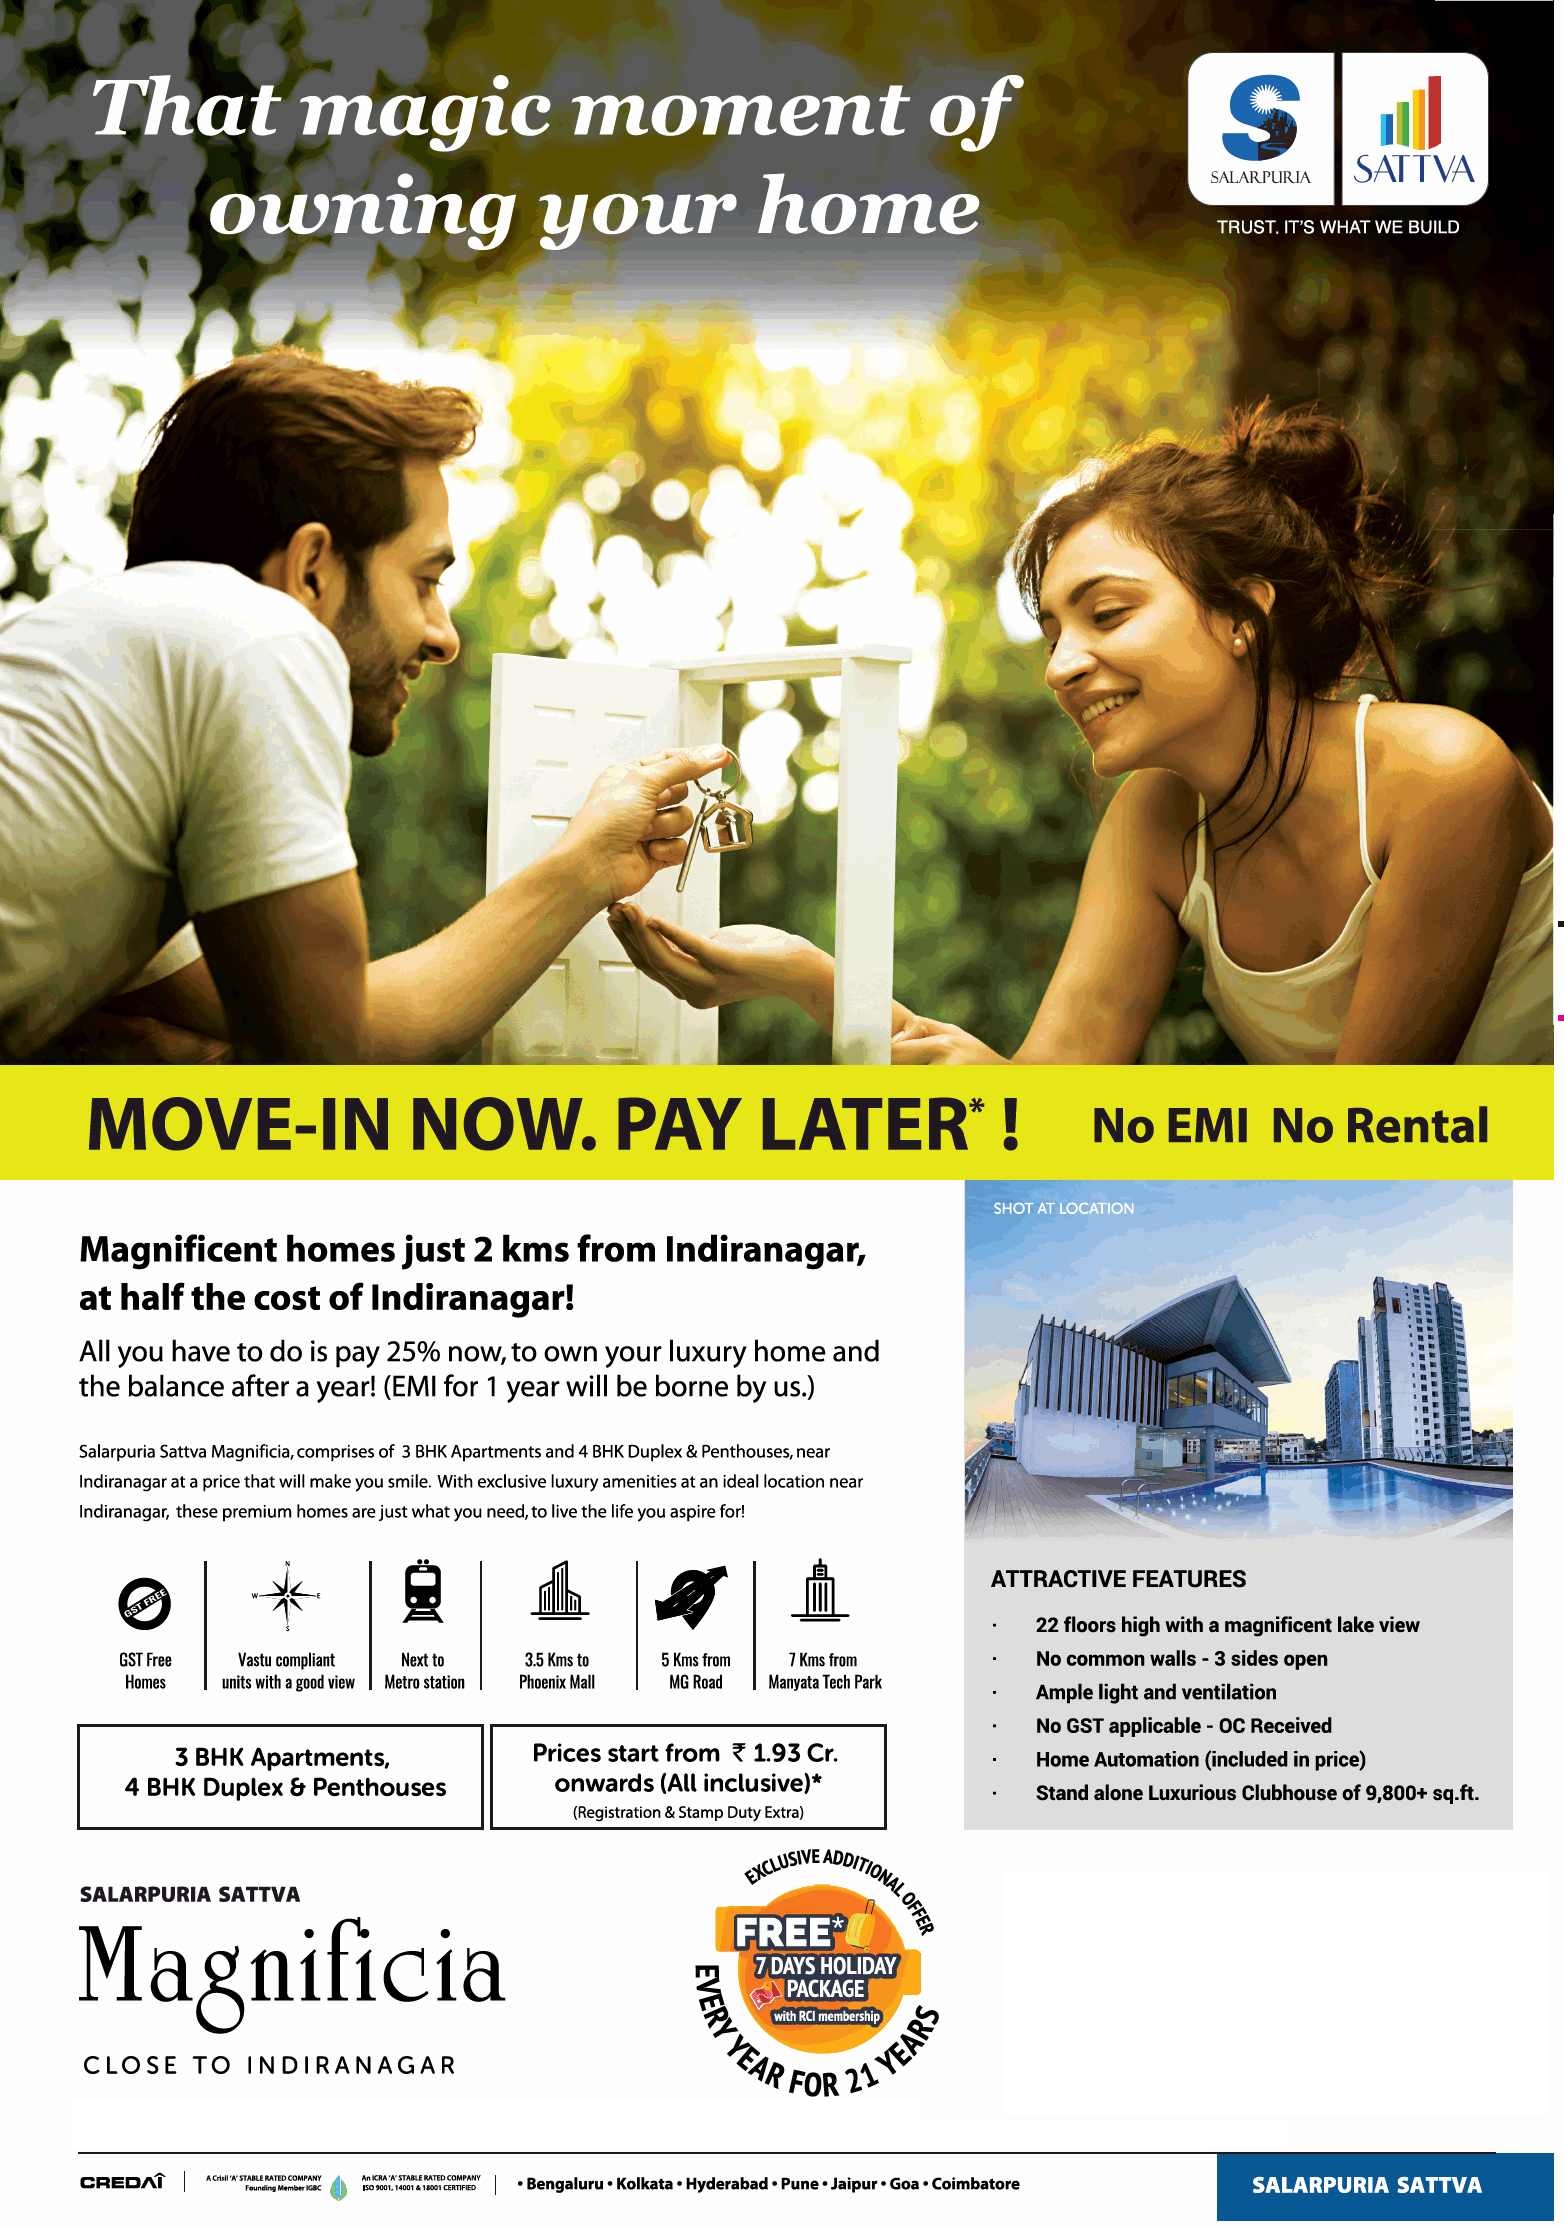 Move in now & pay later with no EMI & no rental at Salarpuria Sattva Magnificia in Bangalore Update